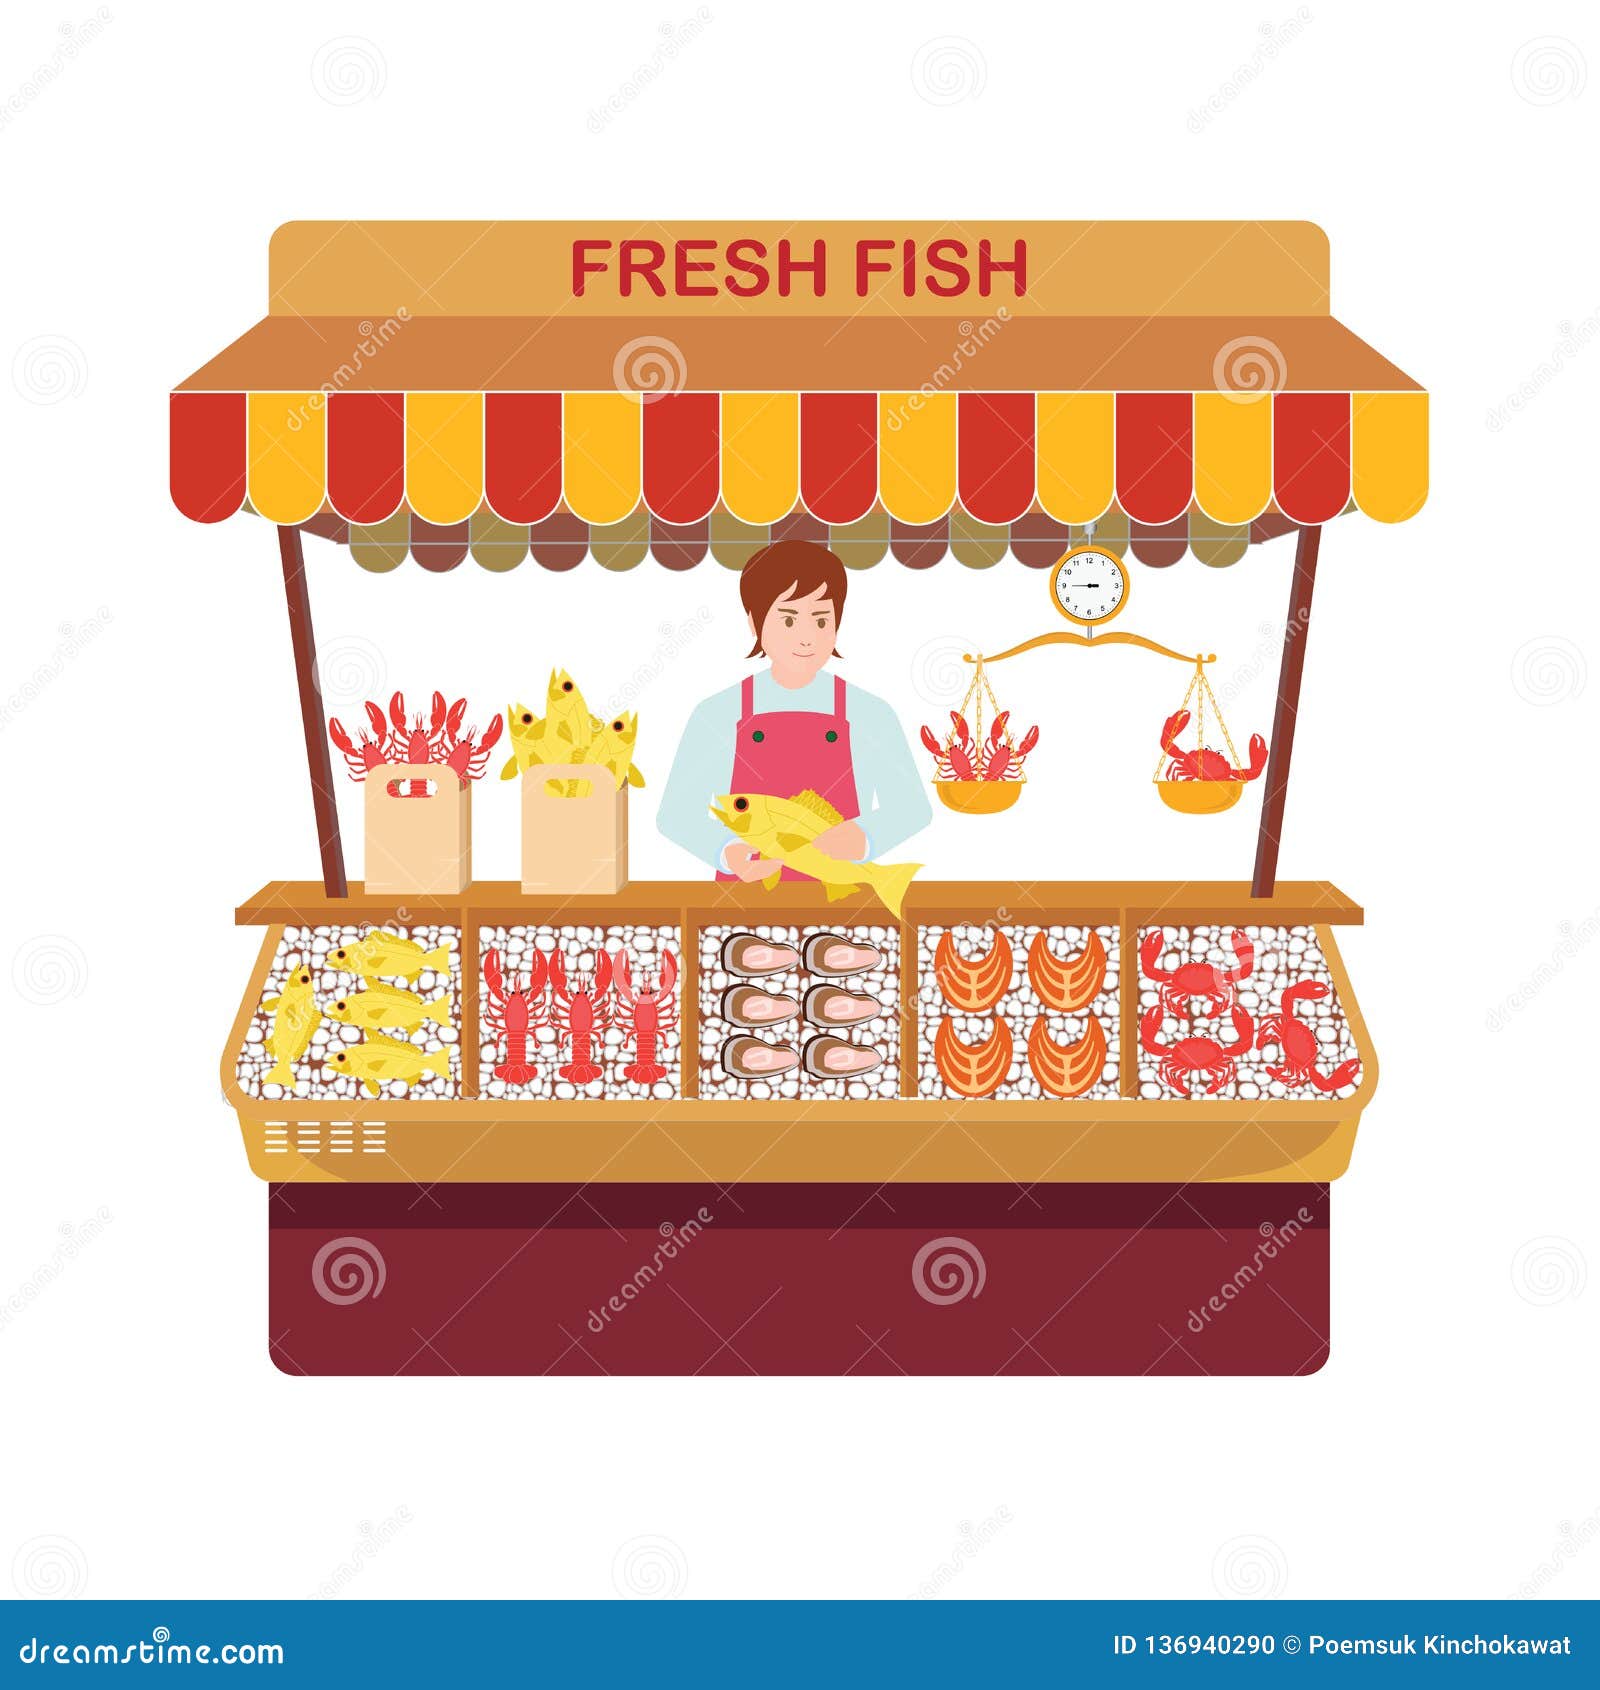 Fish Market With Sellers And Seafood Stock Vector - Illustration of ...